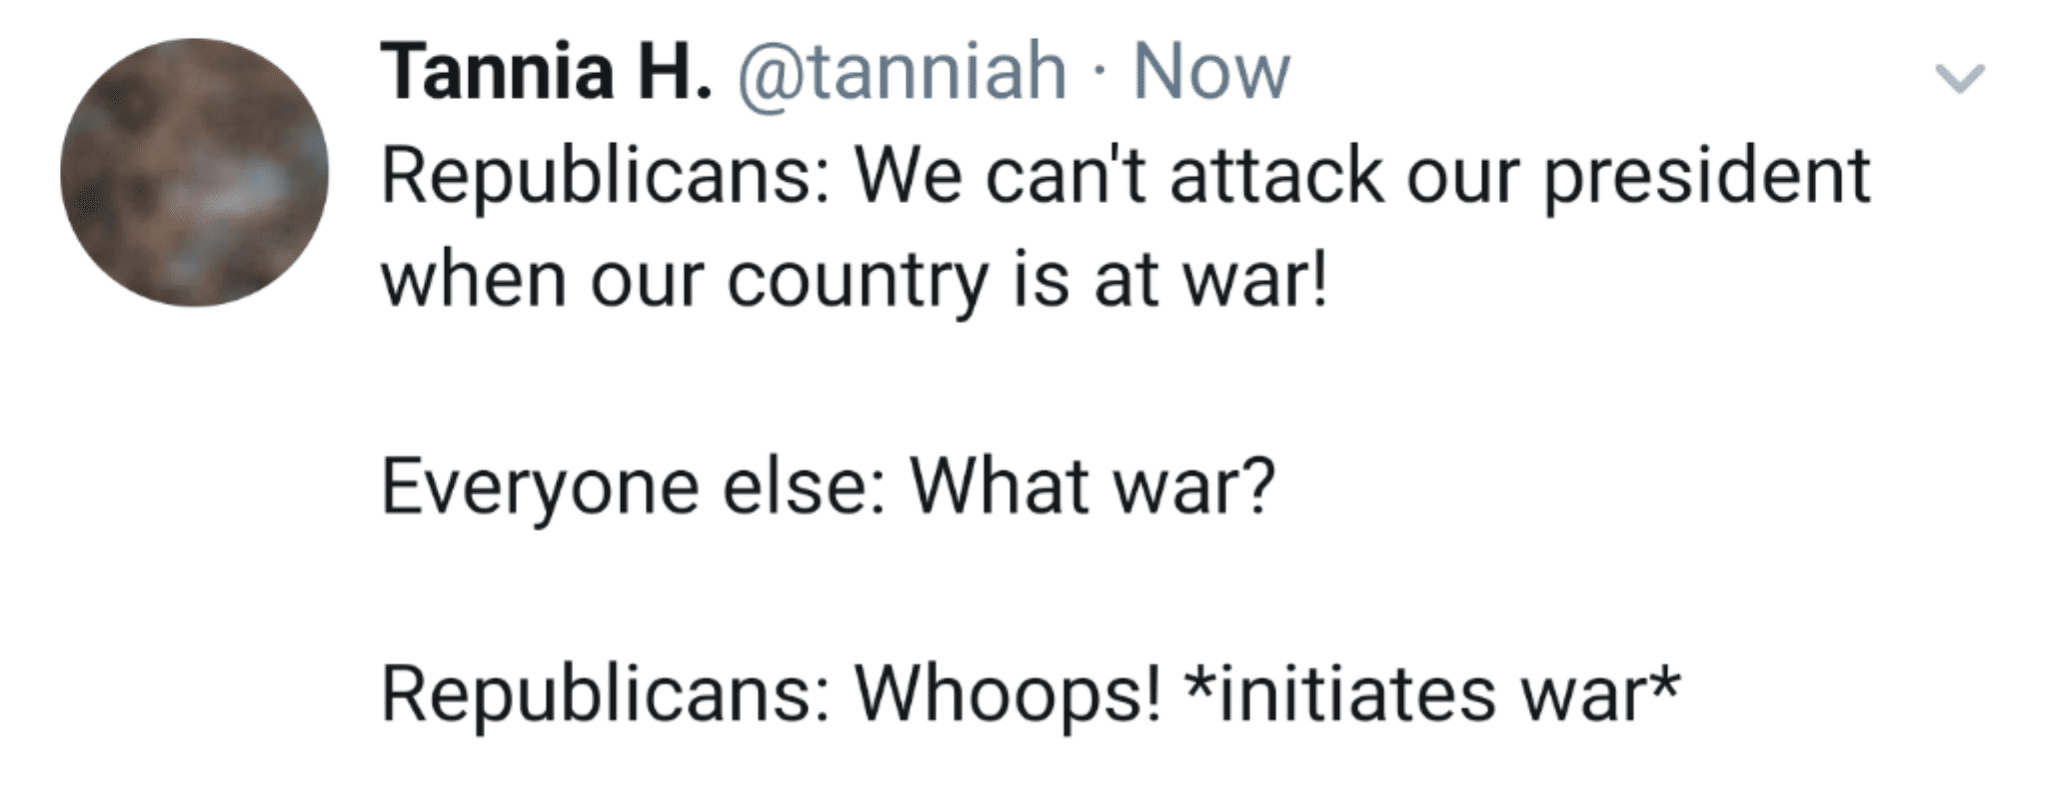 political political-memes political text: Tannia H. @tanniah • Now Republicans: We can't attack our president when our country is at war! Everyone else: What war? Republicans: Whoops! *initiates war* 